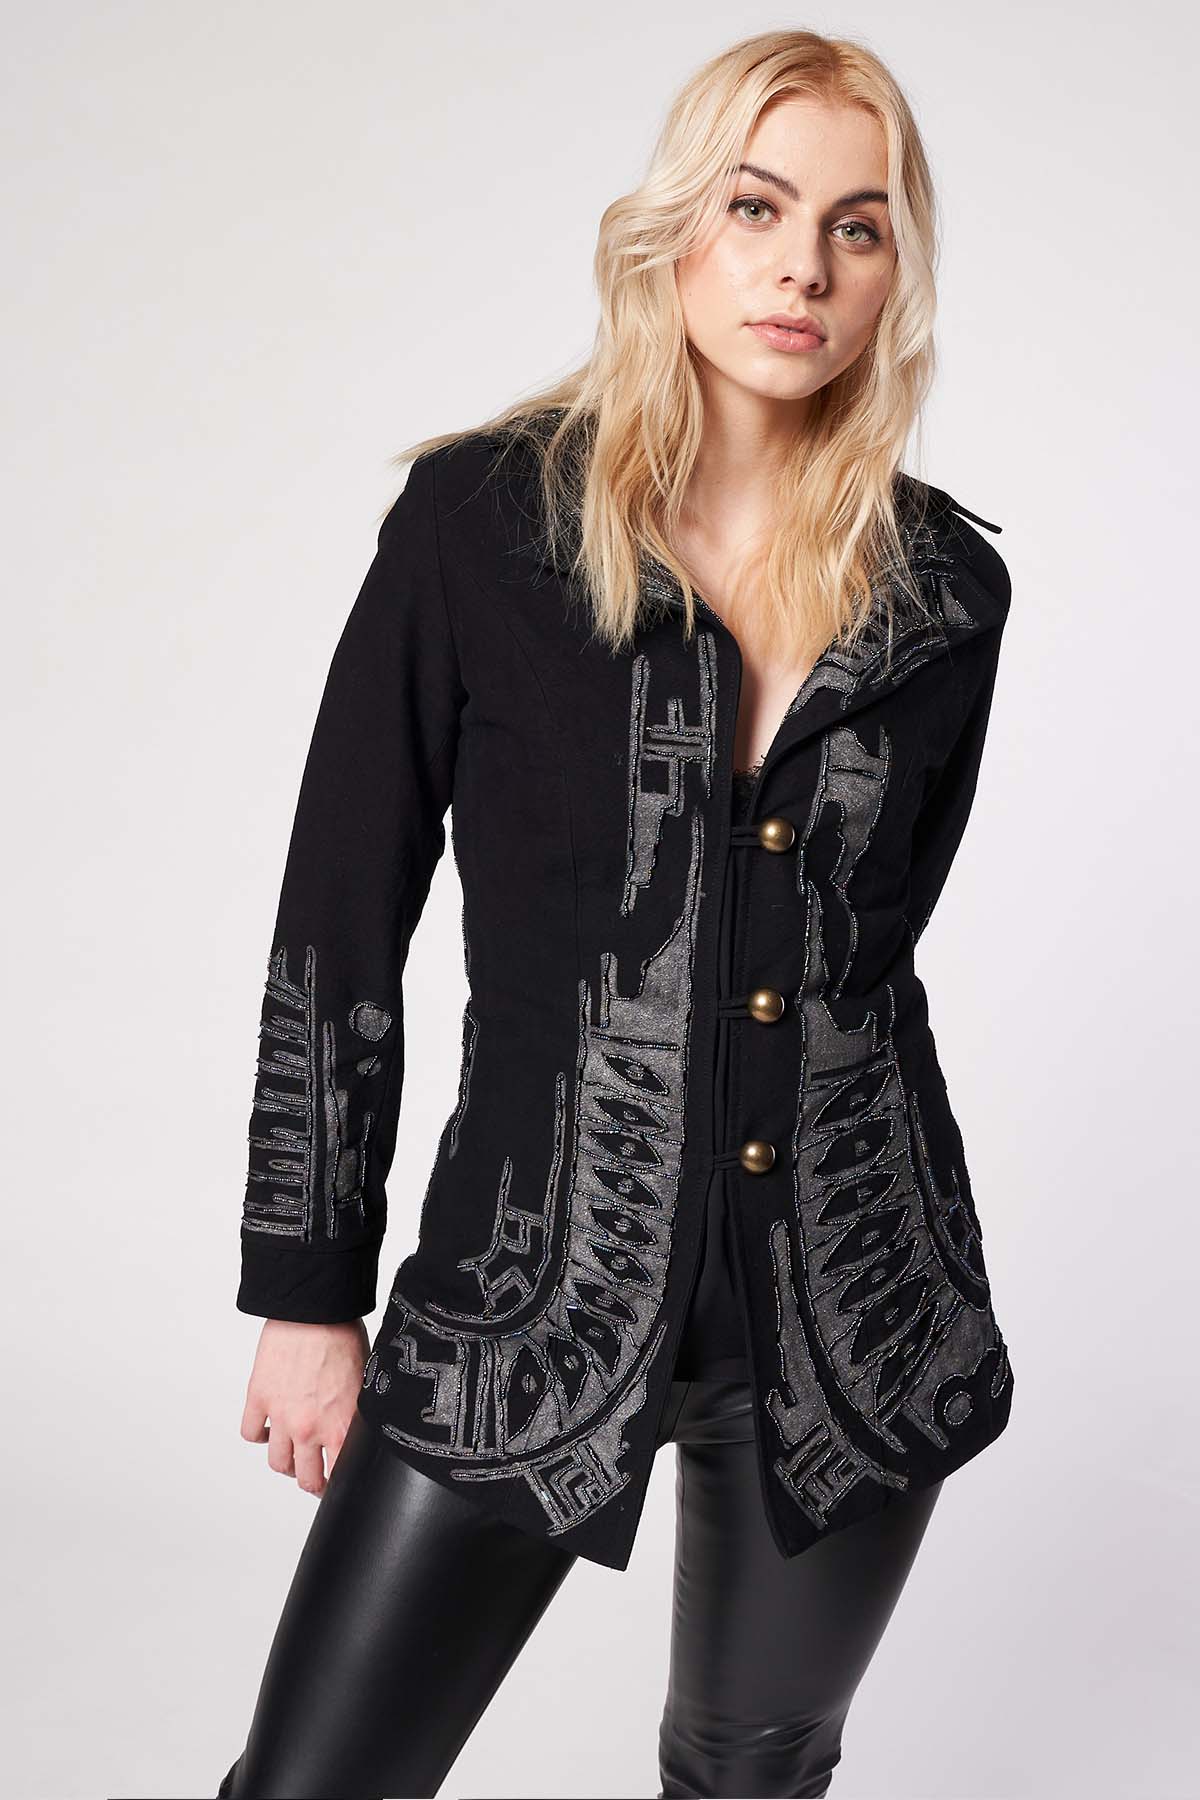 HAND-PAINTED AND HAND-EMBROIDERED JACKET - PAQUIME